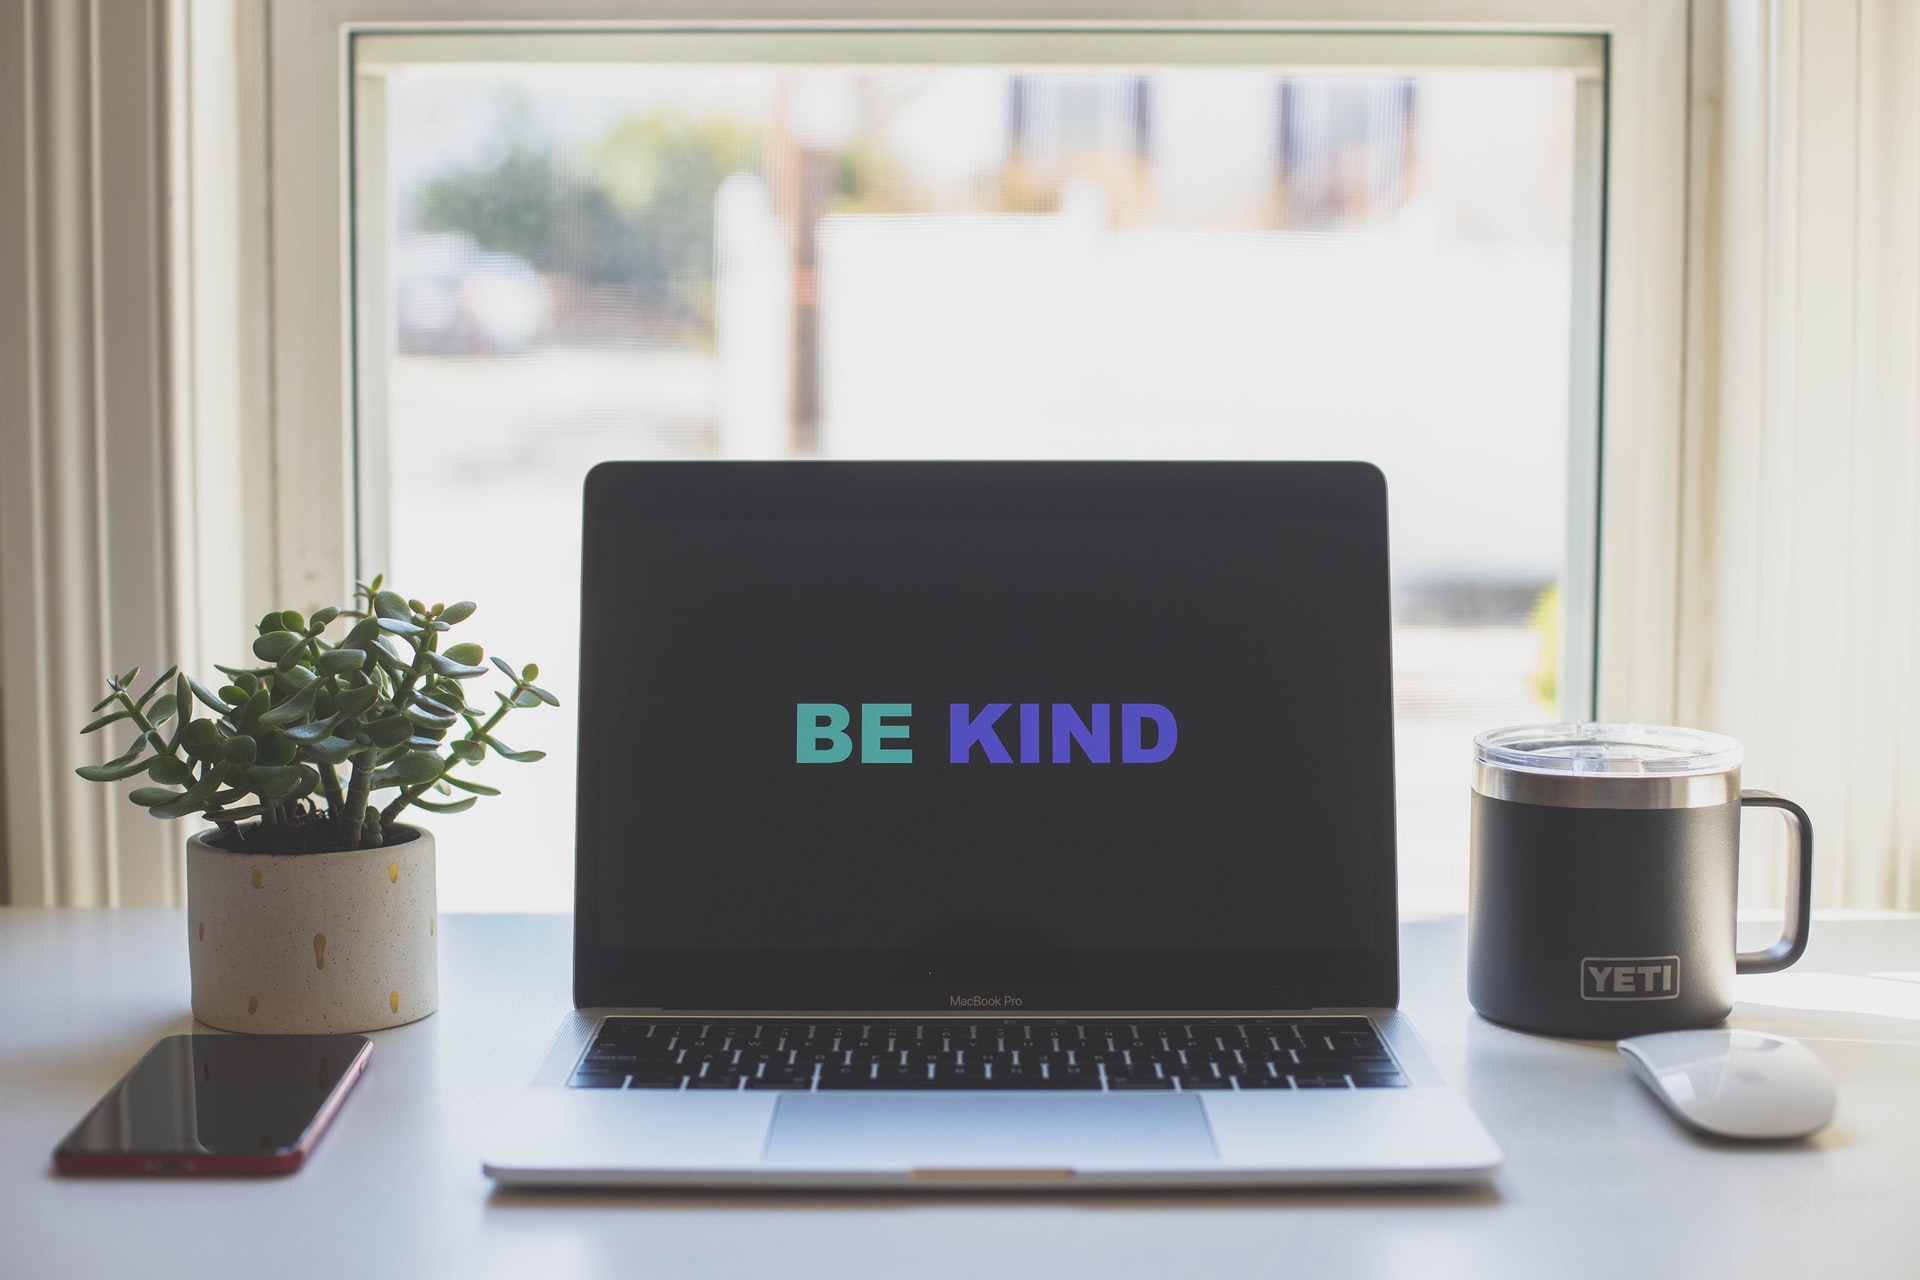 Computer screen saying "be kind"